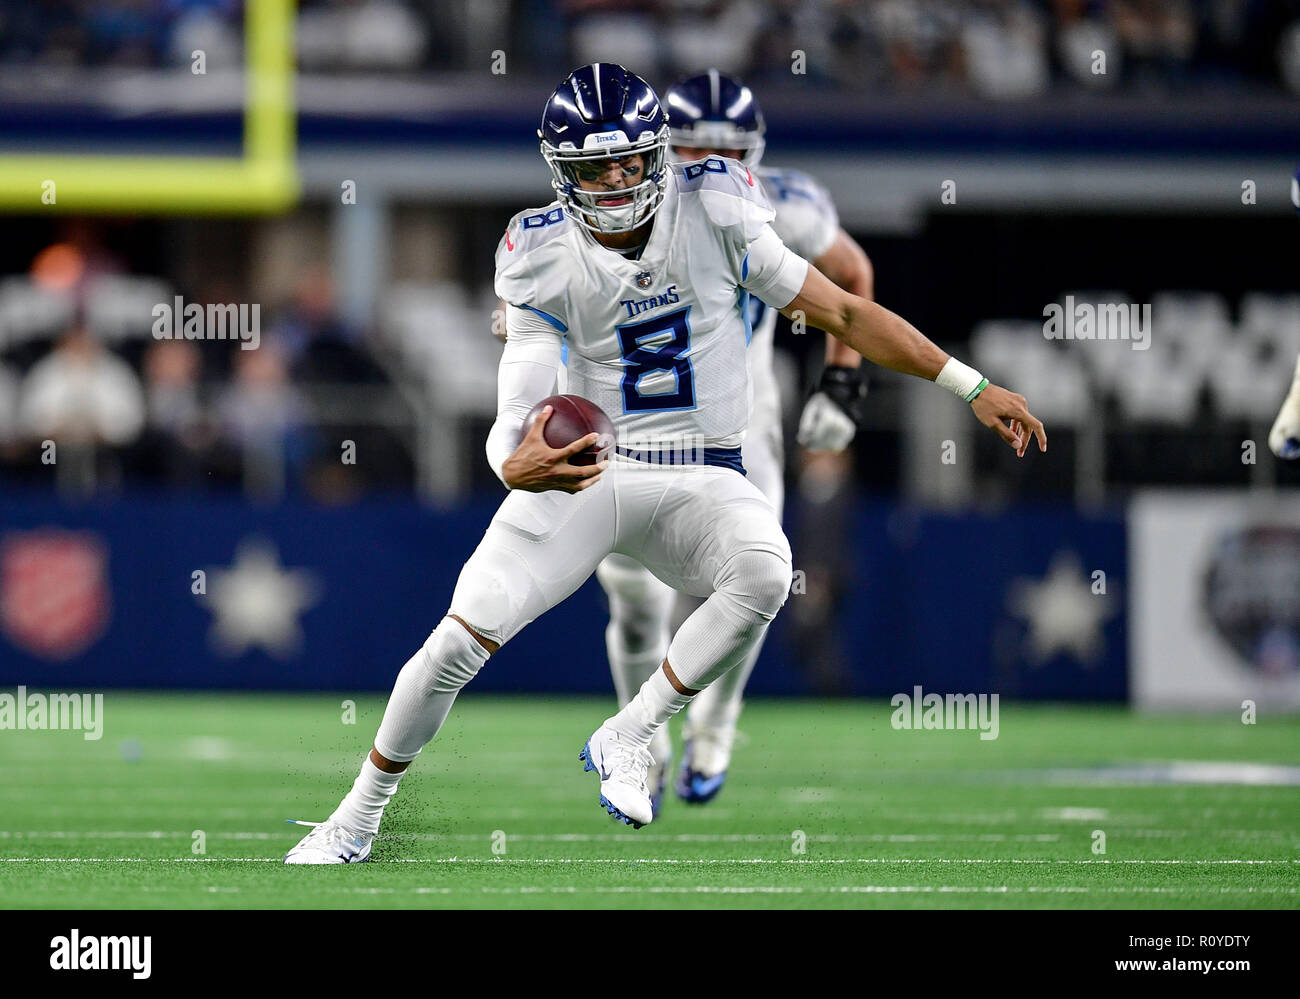 November 05, 2018:.Tennessee Titans quarterback Marcus Mariota (8)  scrambles for a first down during an NFL football game between the Tennessee  Titans and Dallas Cowboys at AT&T Stadium in Arlington, Texas. Manny